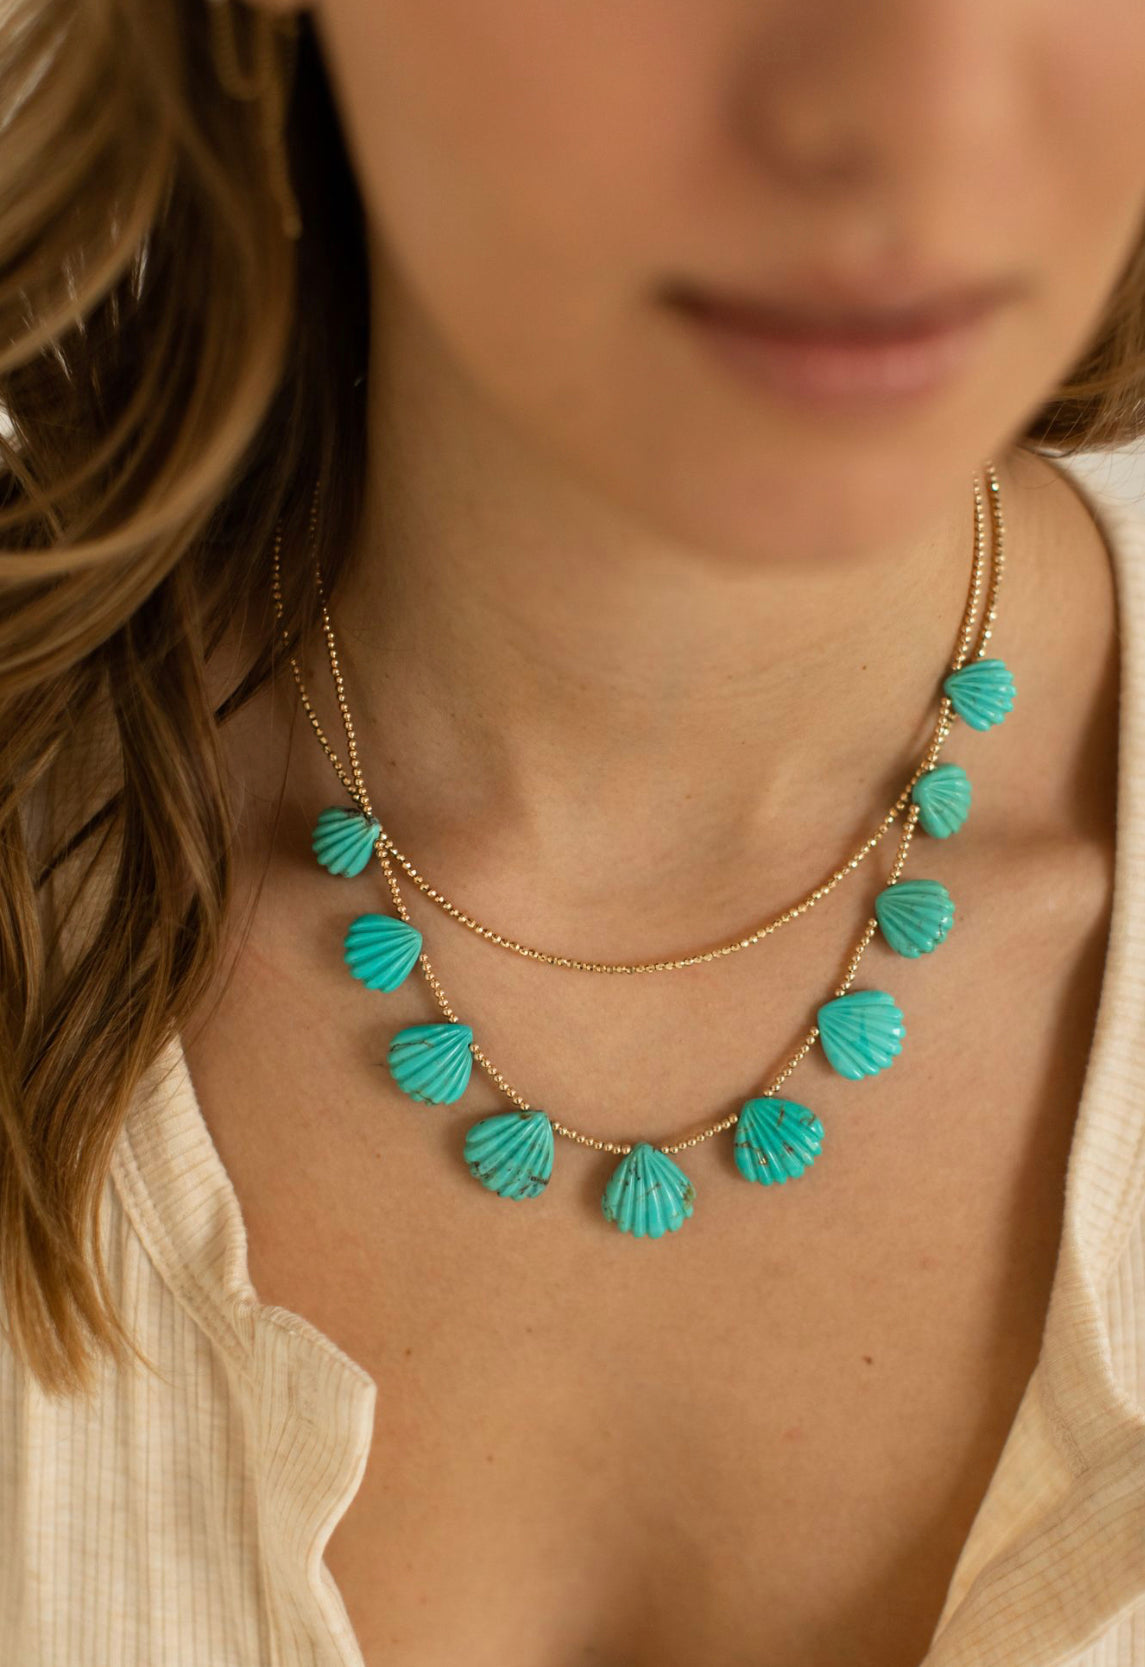 TURQUOISE SHELL NECKLACE WITH 14k GOLD BEADS